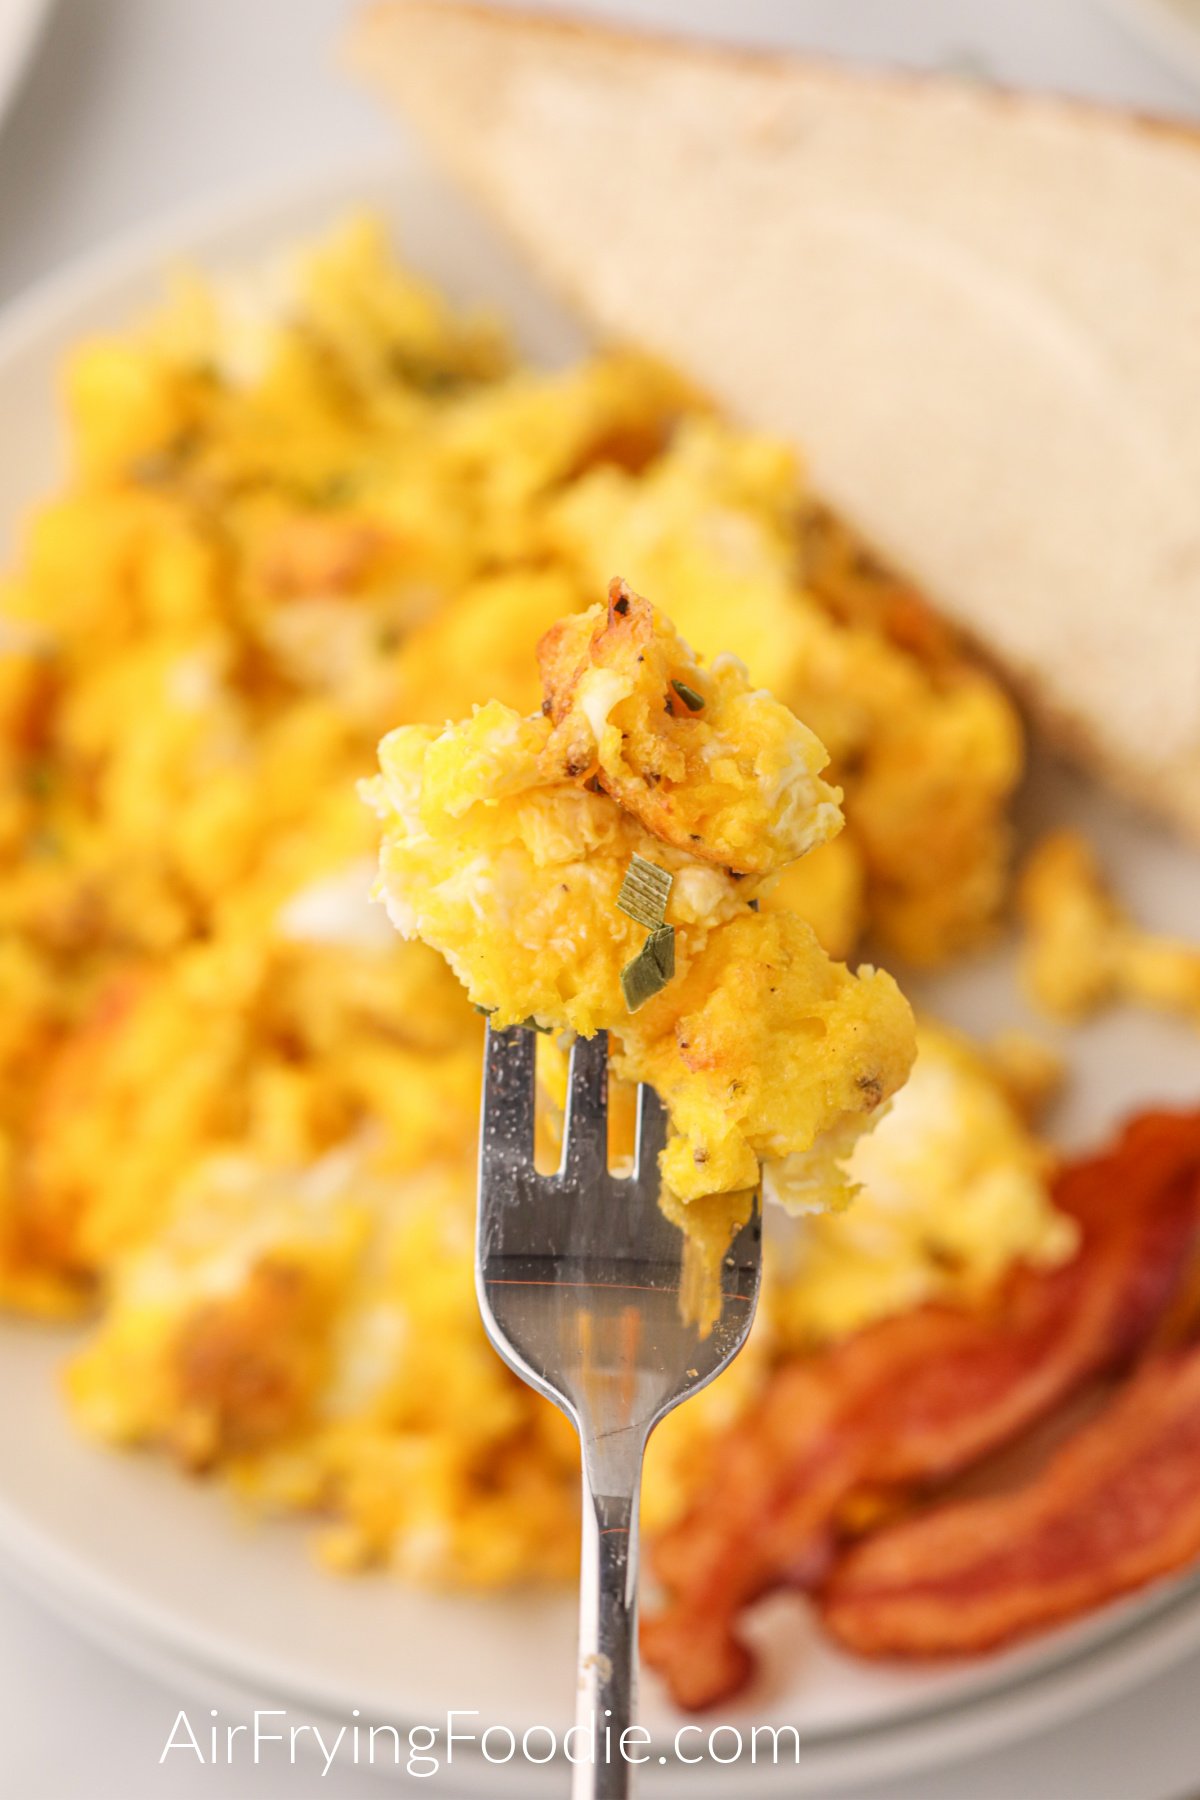 Scrambled eggs on a fork ready to eat. 